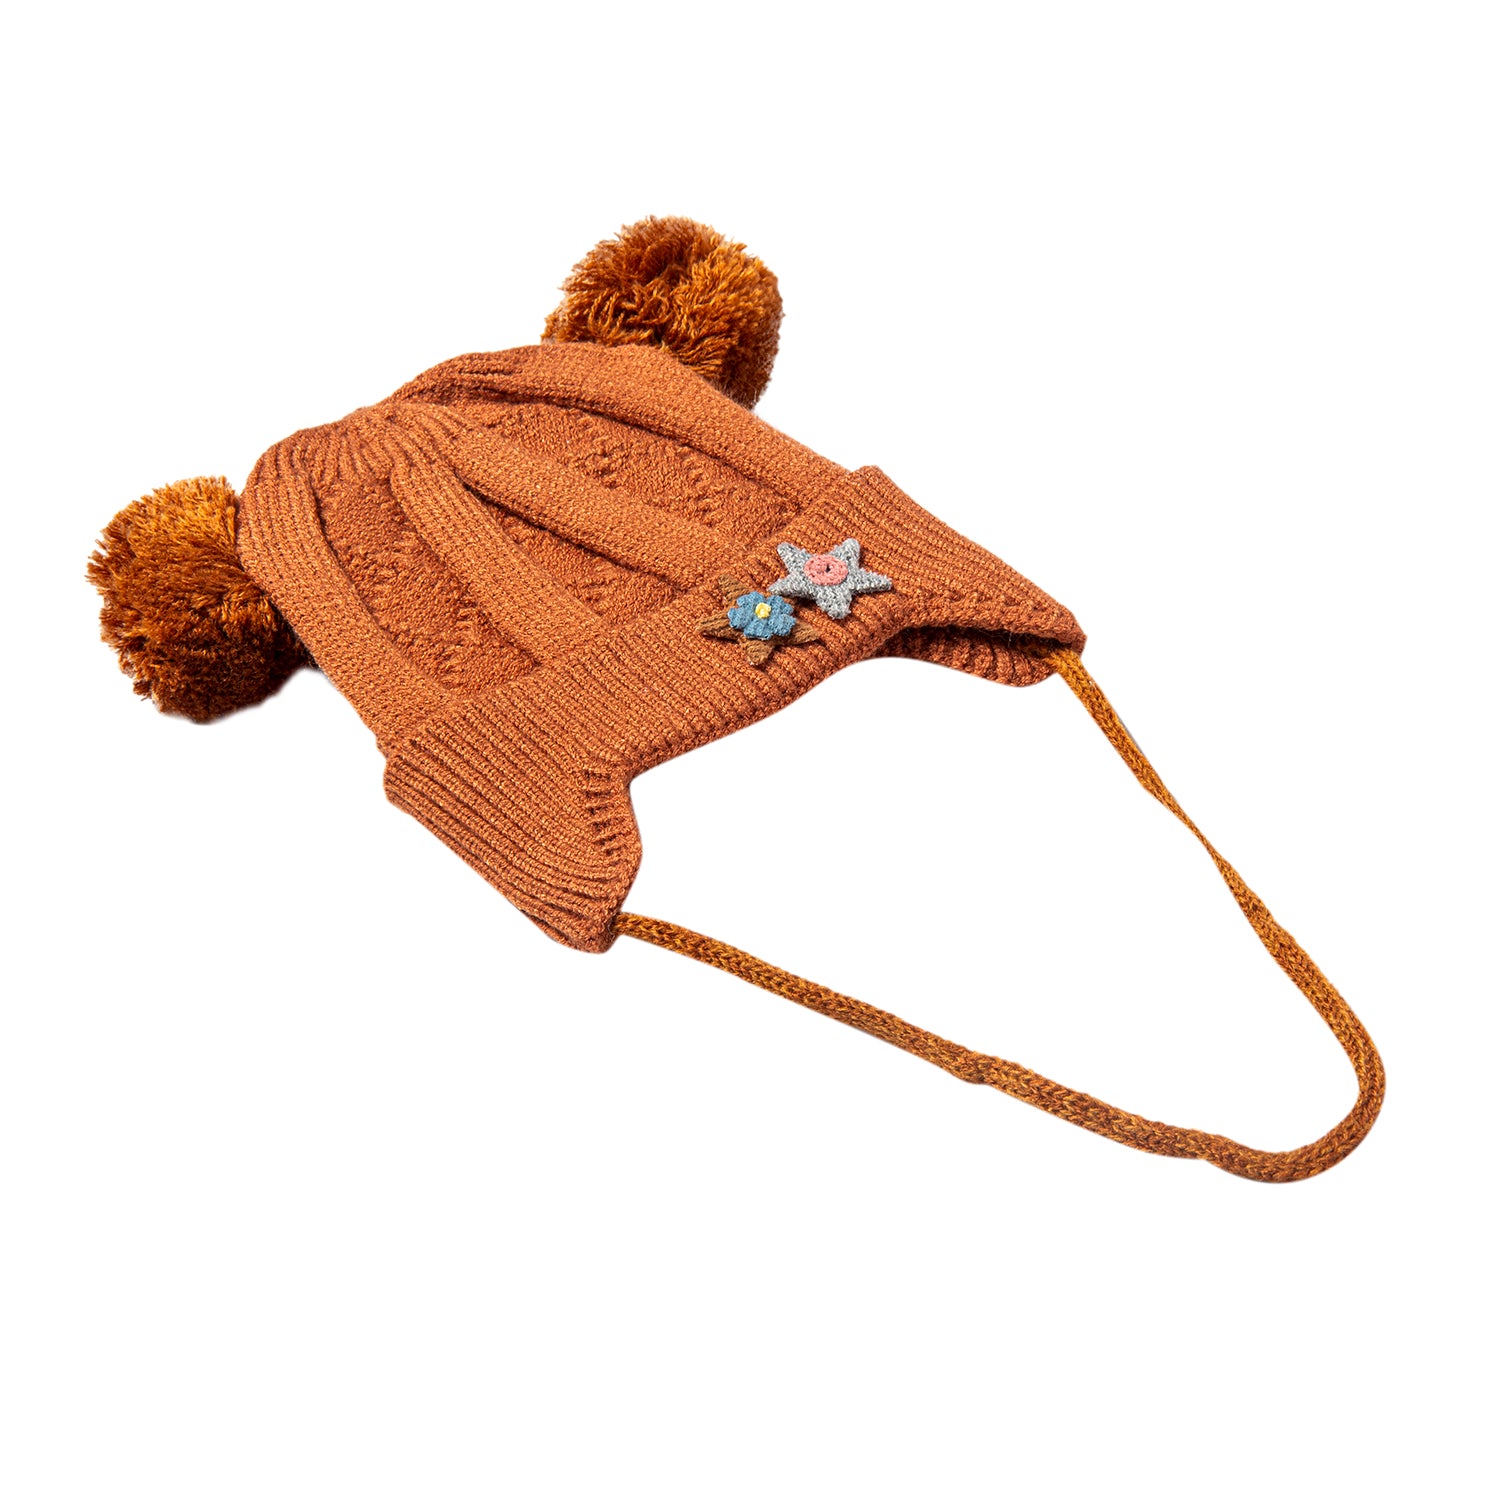 Baby Moo Knit Woollen Cap With Tie For Ear Cover Starry Pom Pom Brown